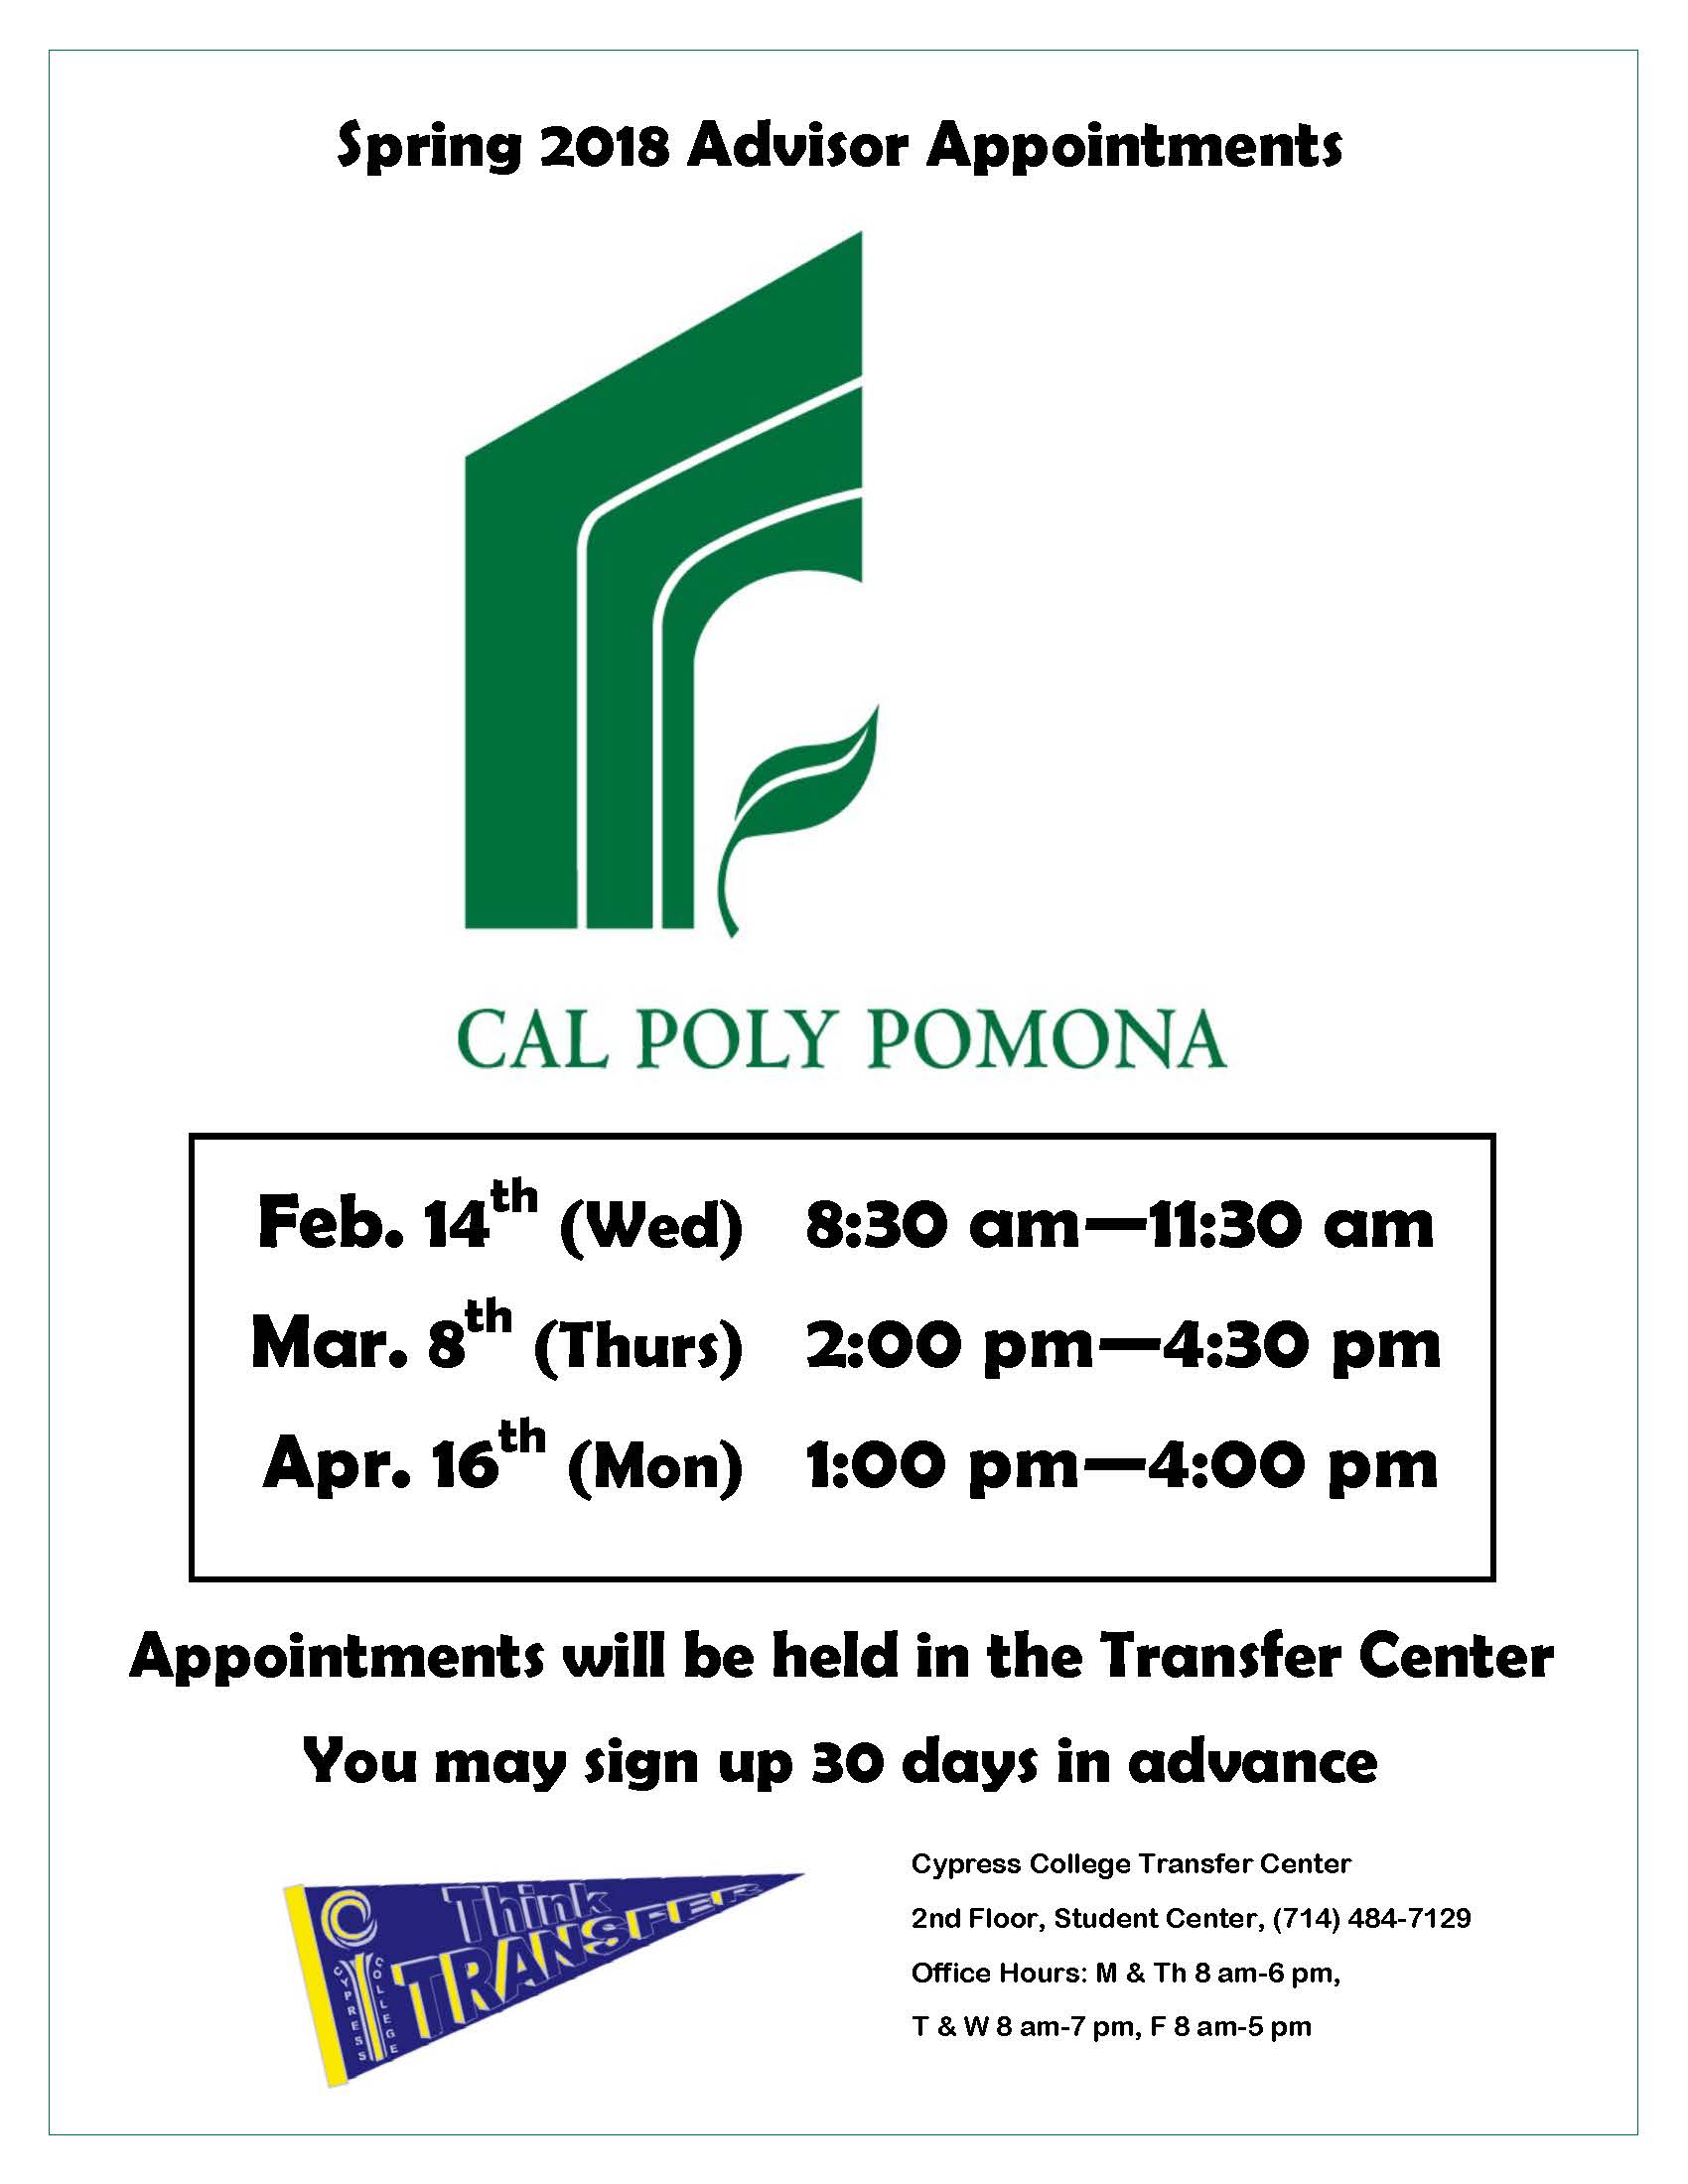 Cal Poly Pomona Spring 2018 Advisor Appointments flyer.